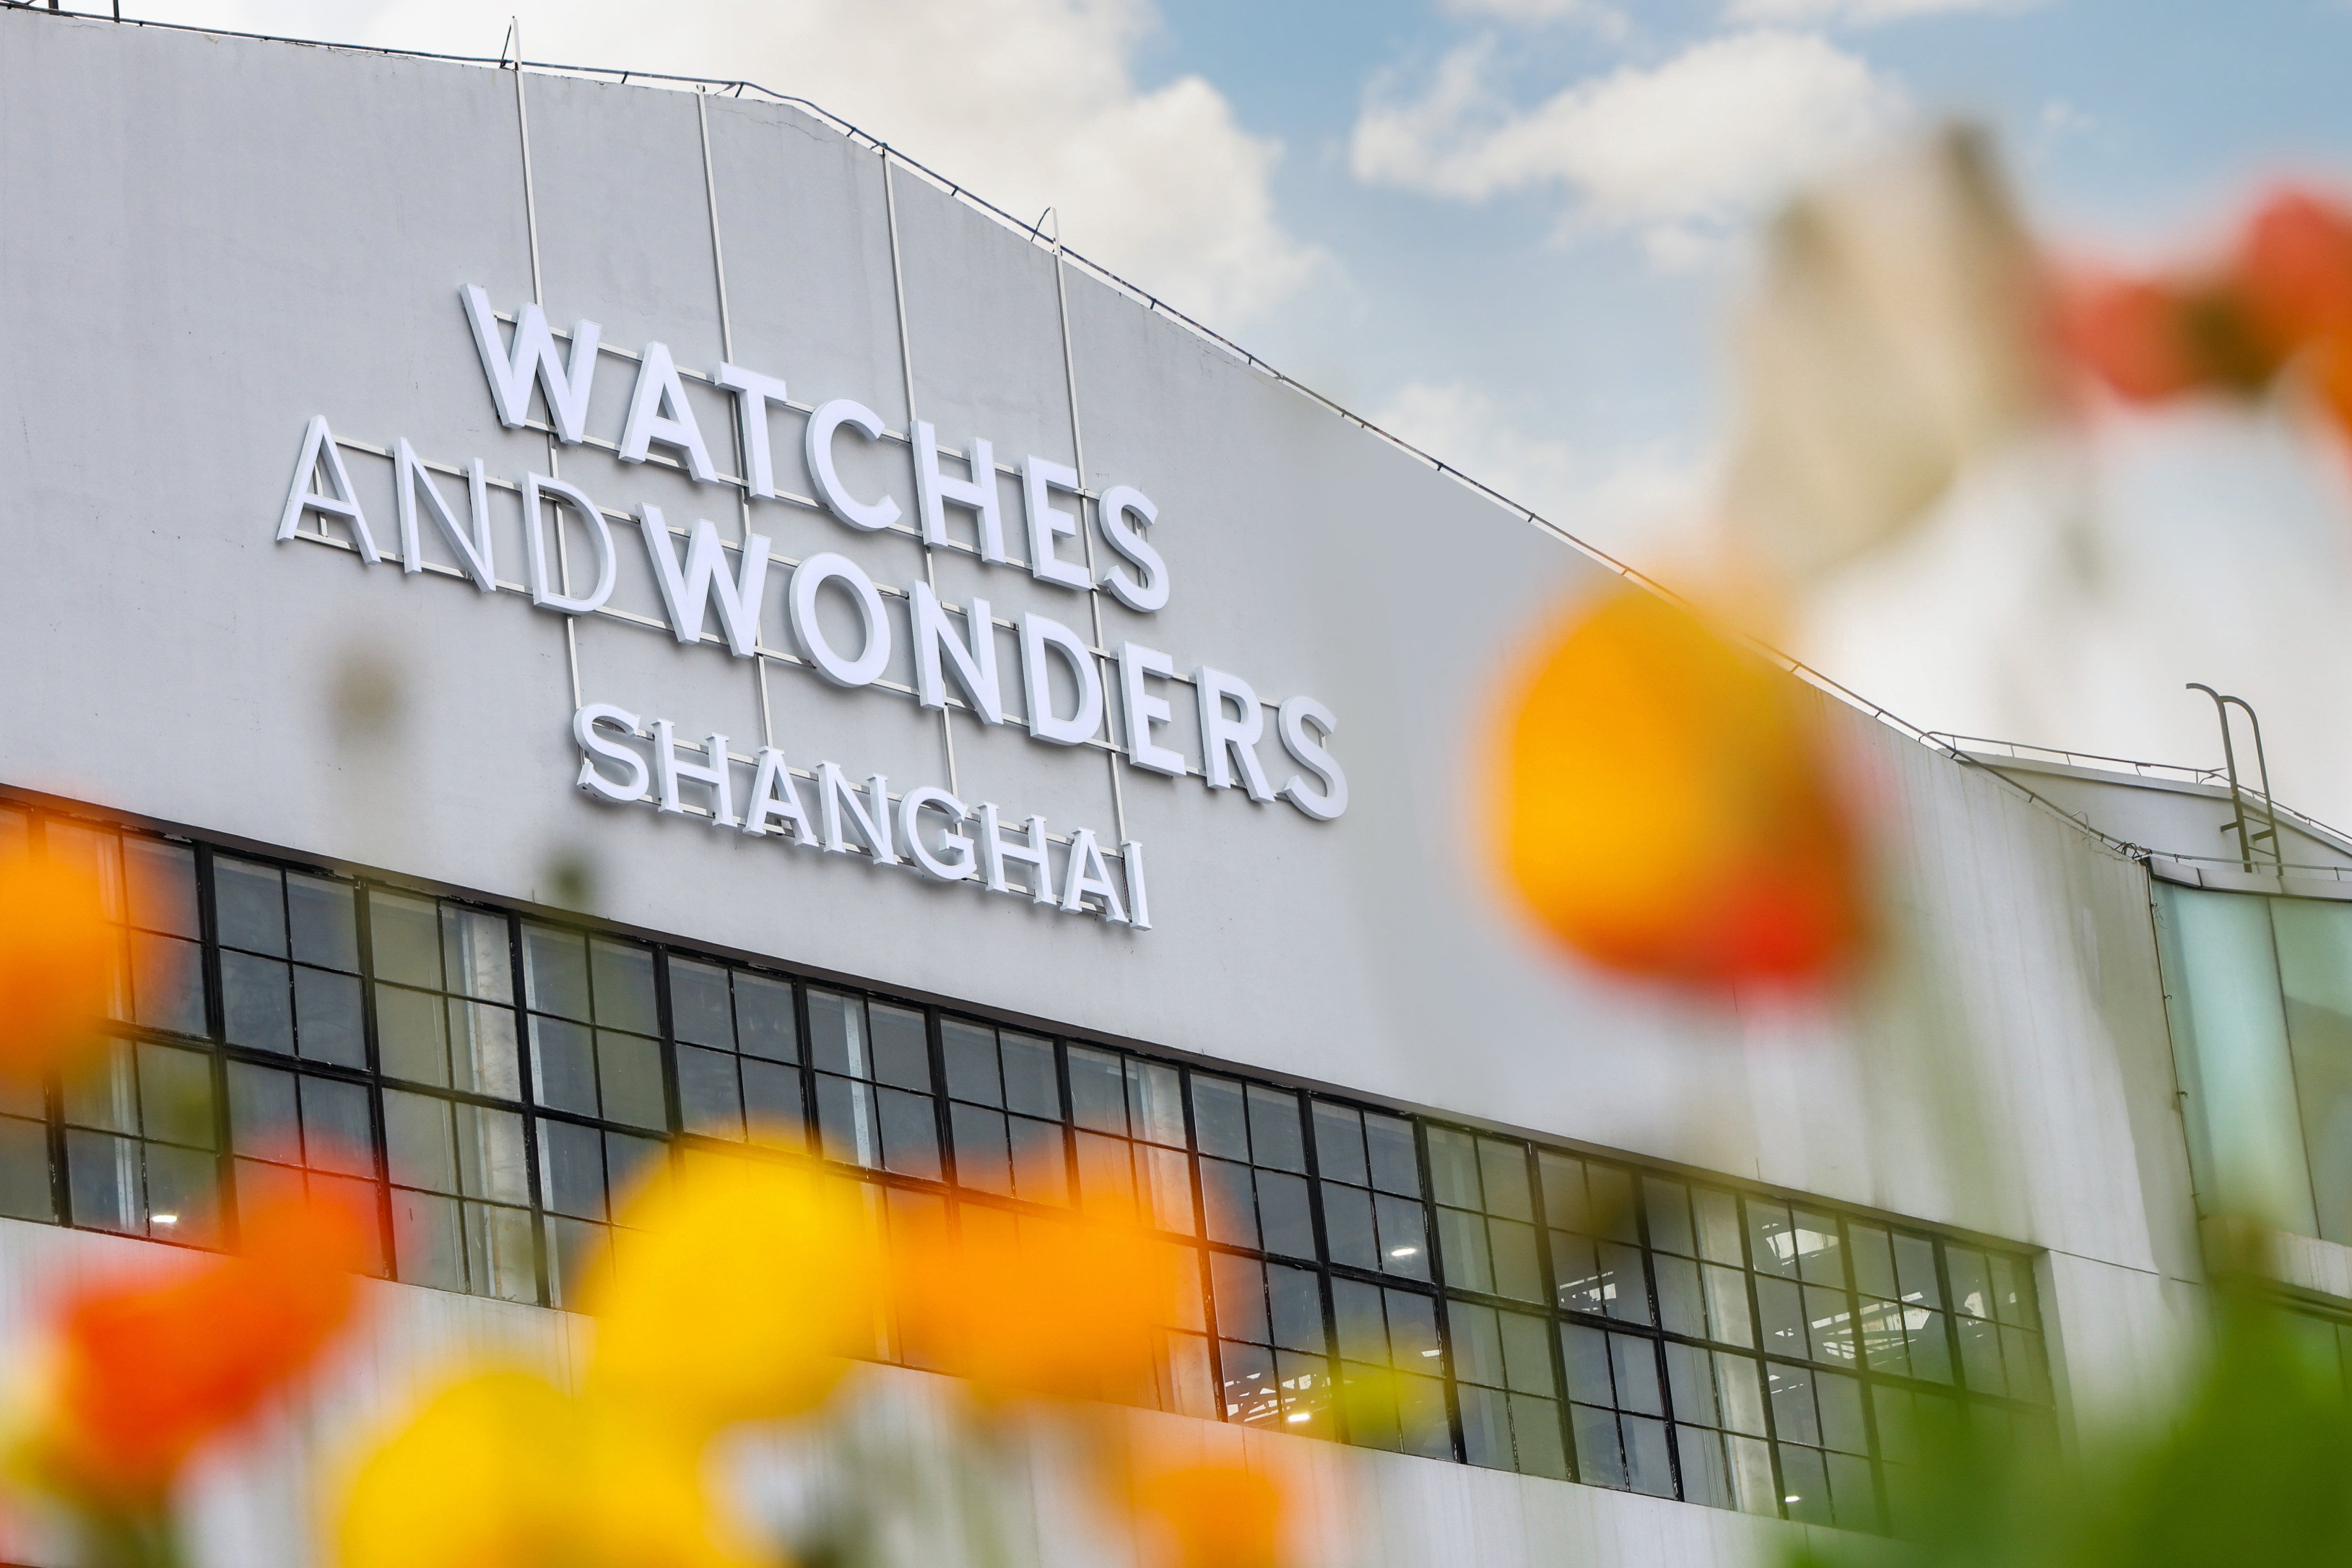 Watches and Wonders returns to Shanghai for the third time in September 2023. Photo: Handout